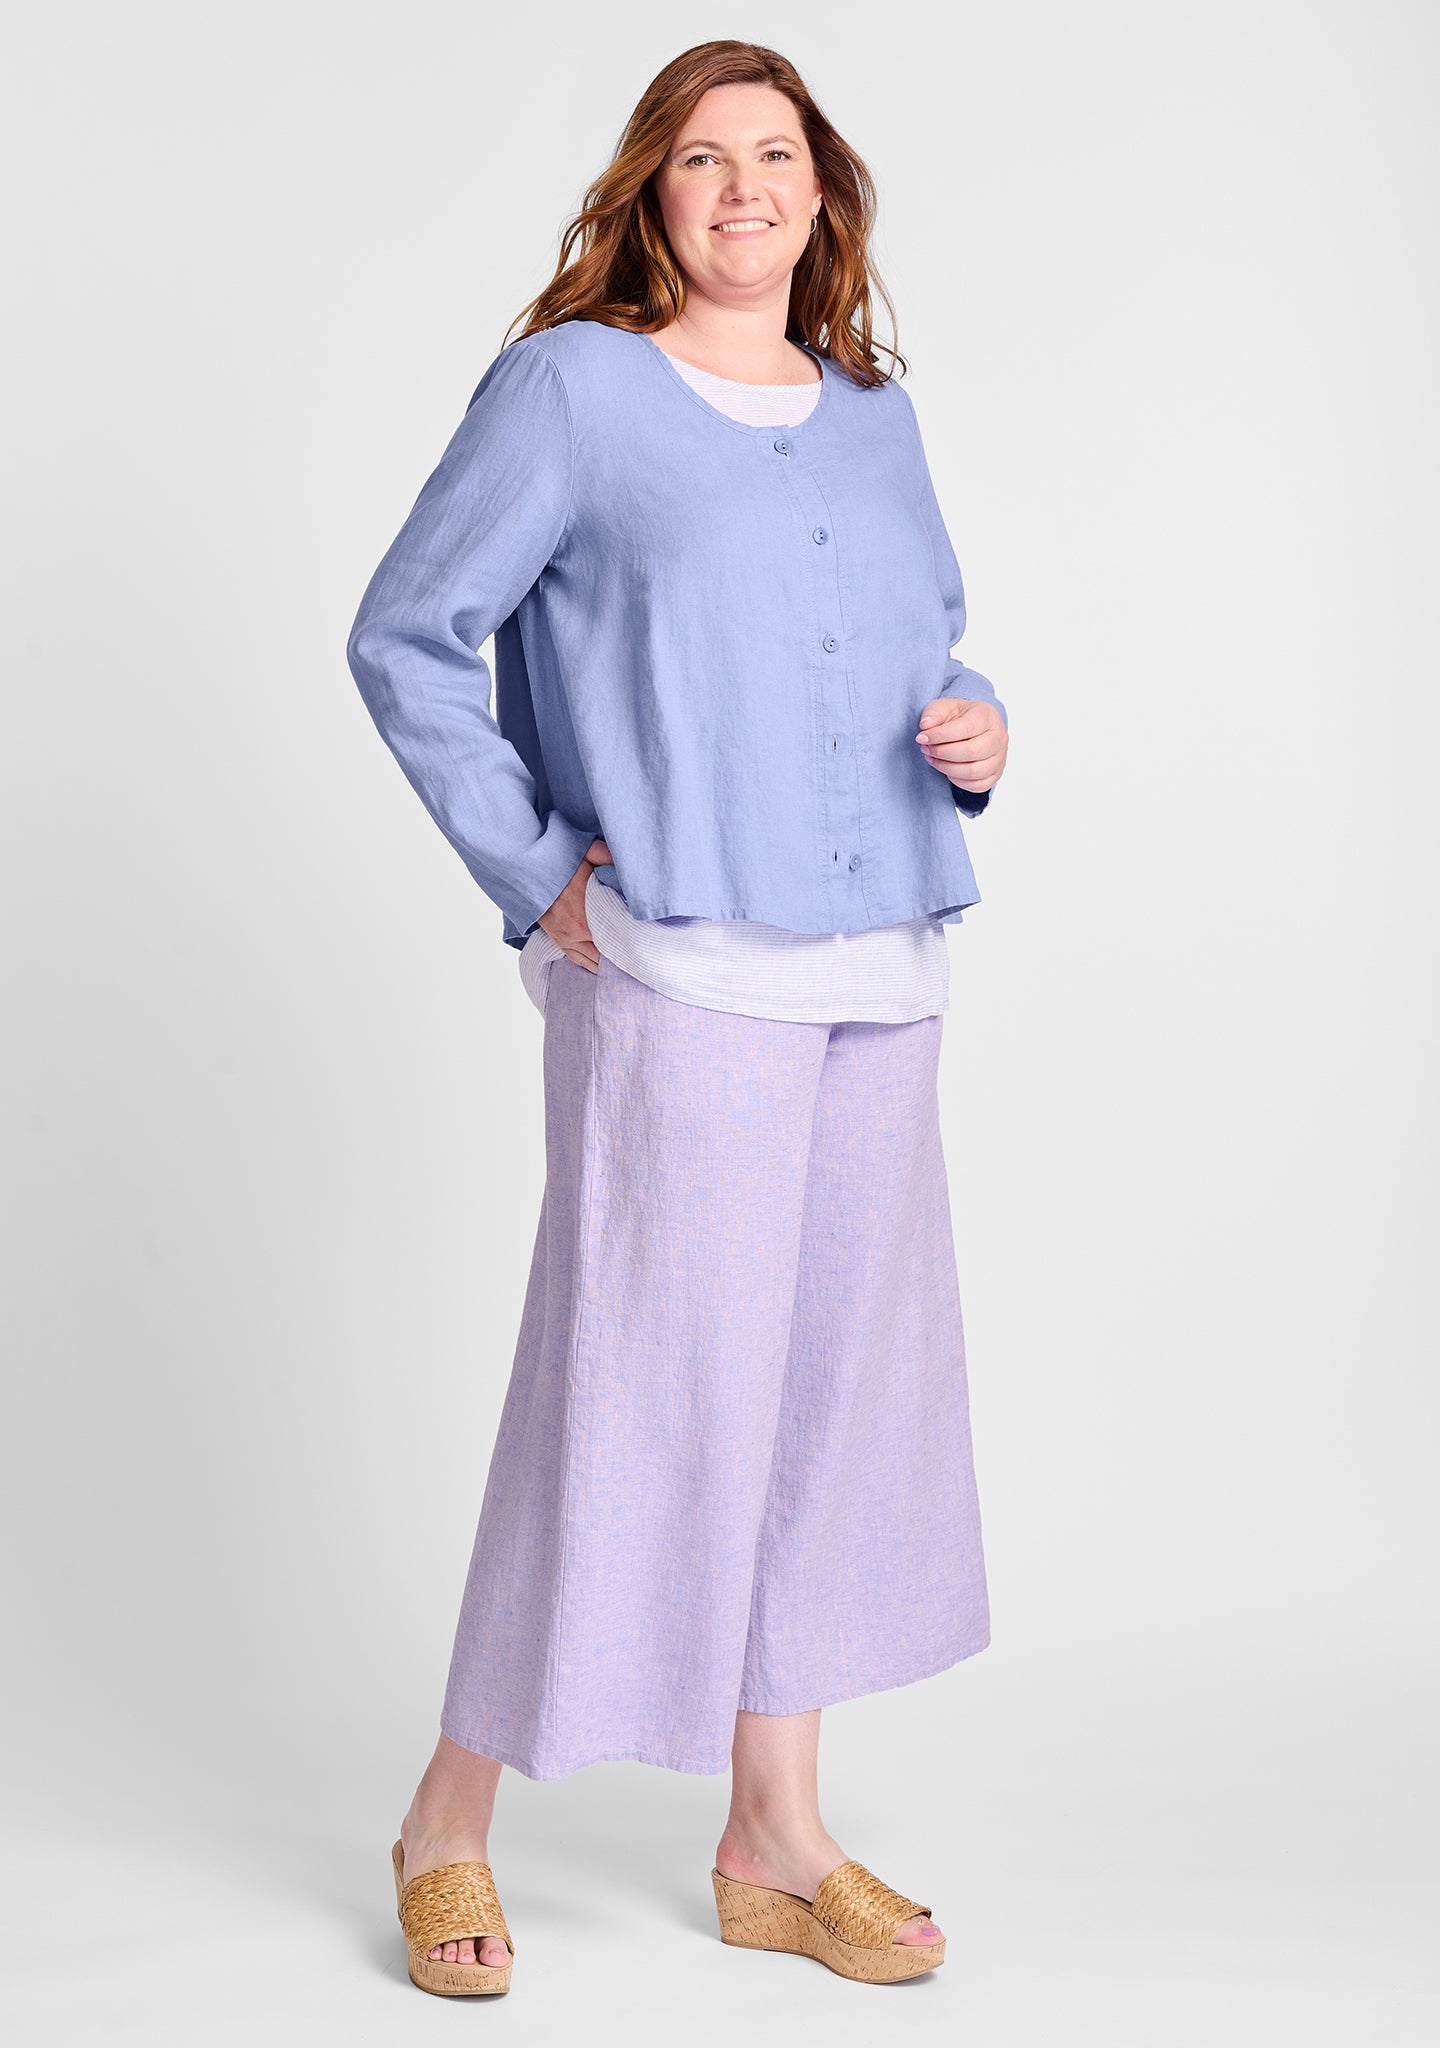 FLAX linen shirt in blue with linen tank in purple and linen pants in purple